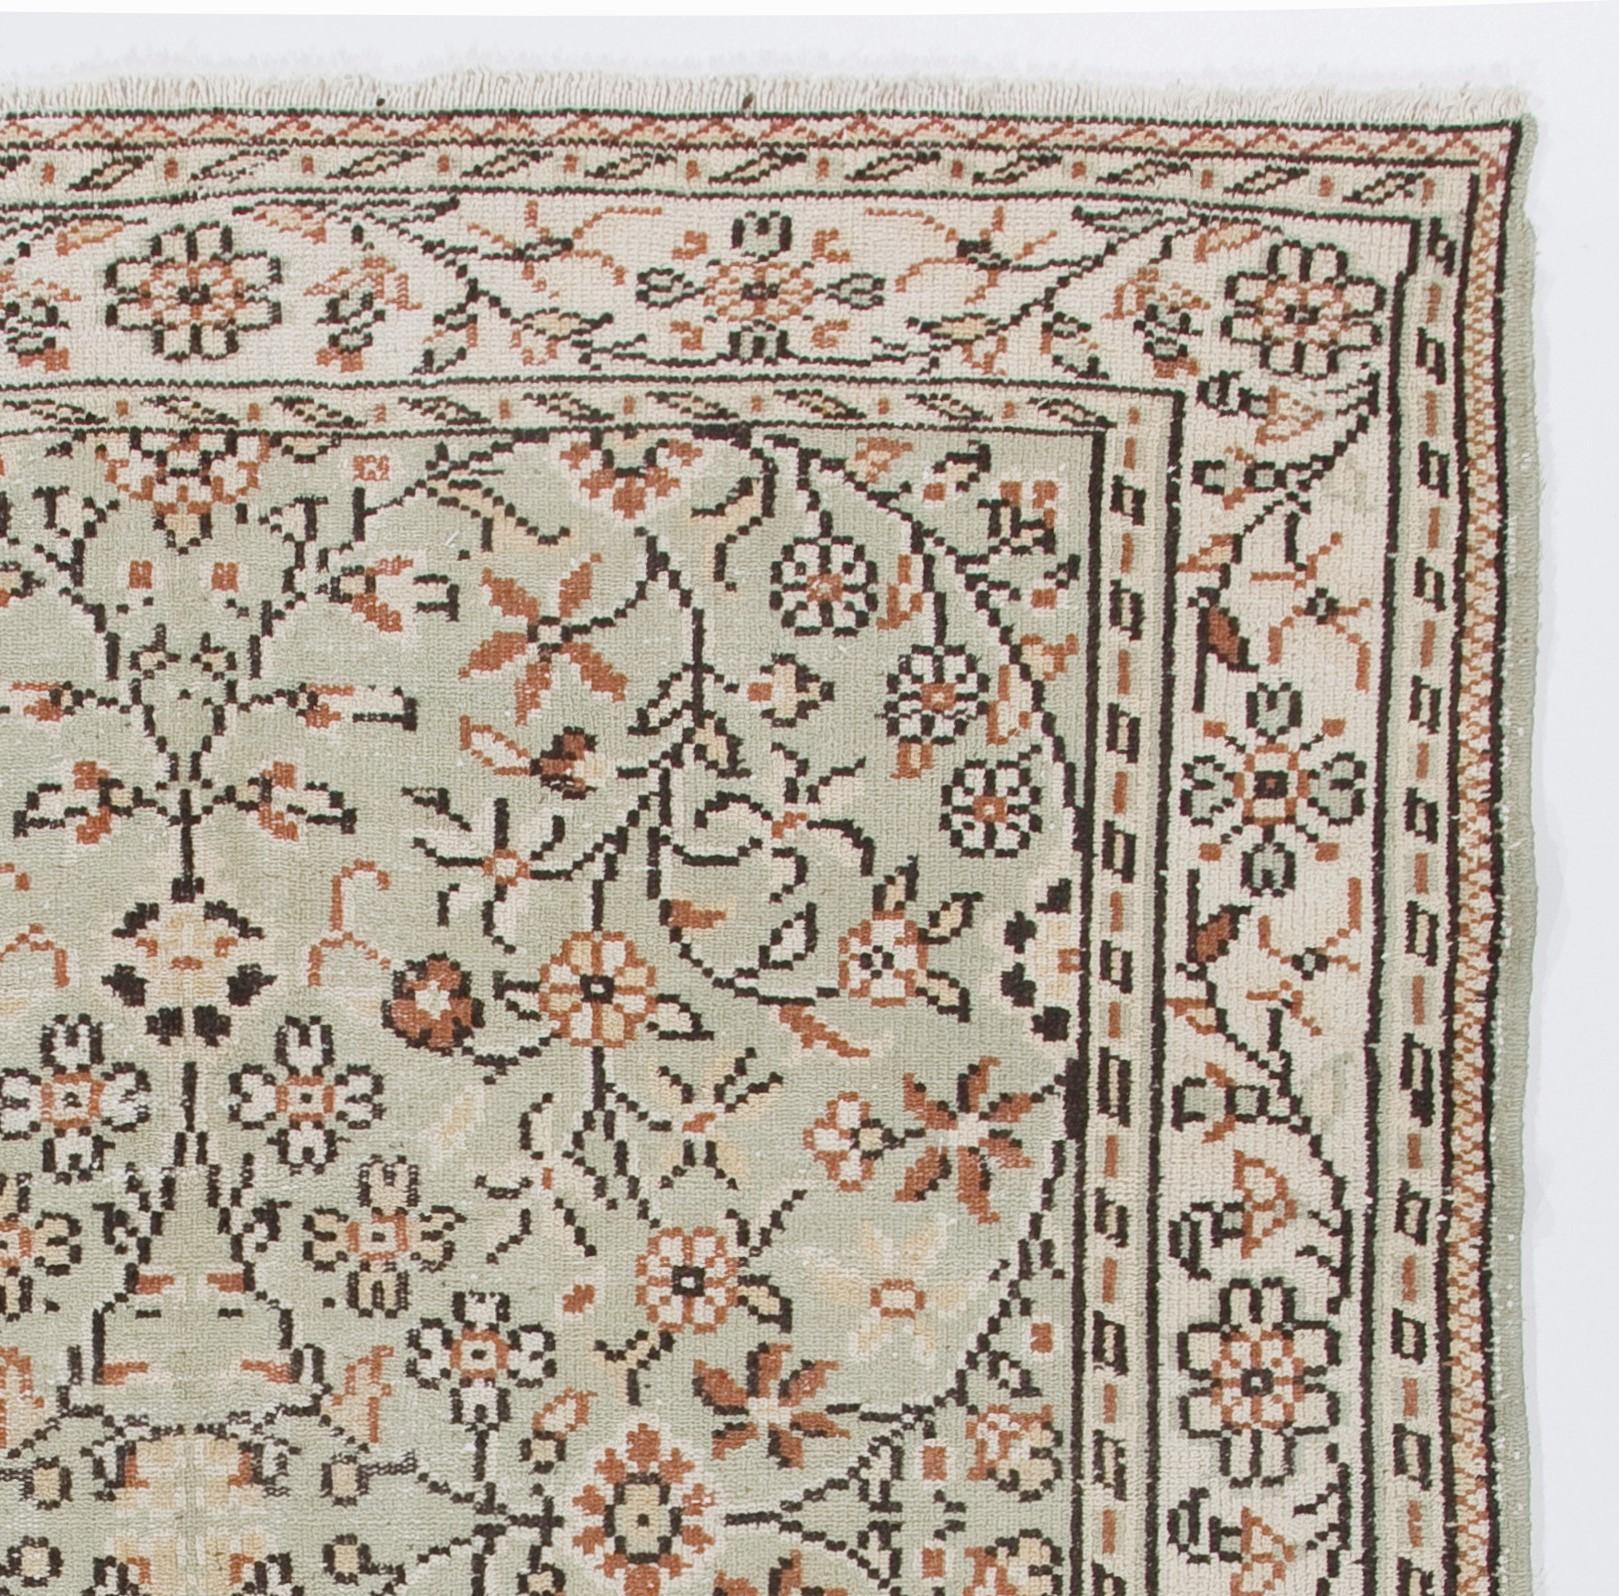 This vintage handmade Turkish area rug measures: 6.2 x 9 ft
It was hand knotted in the 1960s and features an all-over floral design.
Low wool pile on finely woven cotton foundation.
Sturdy and can be used on a high traffic area, suitable for both